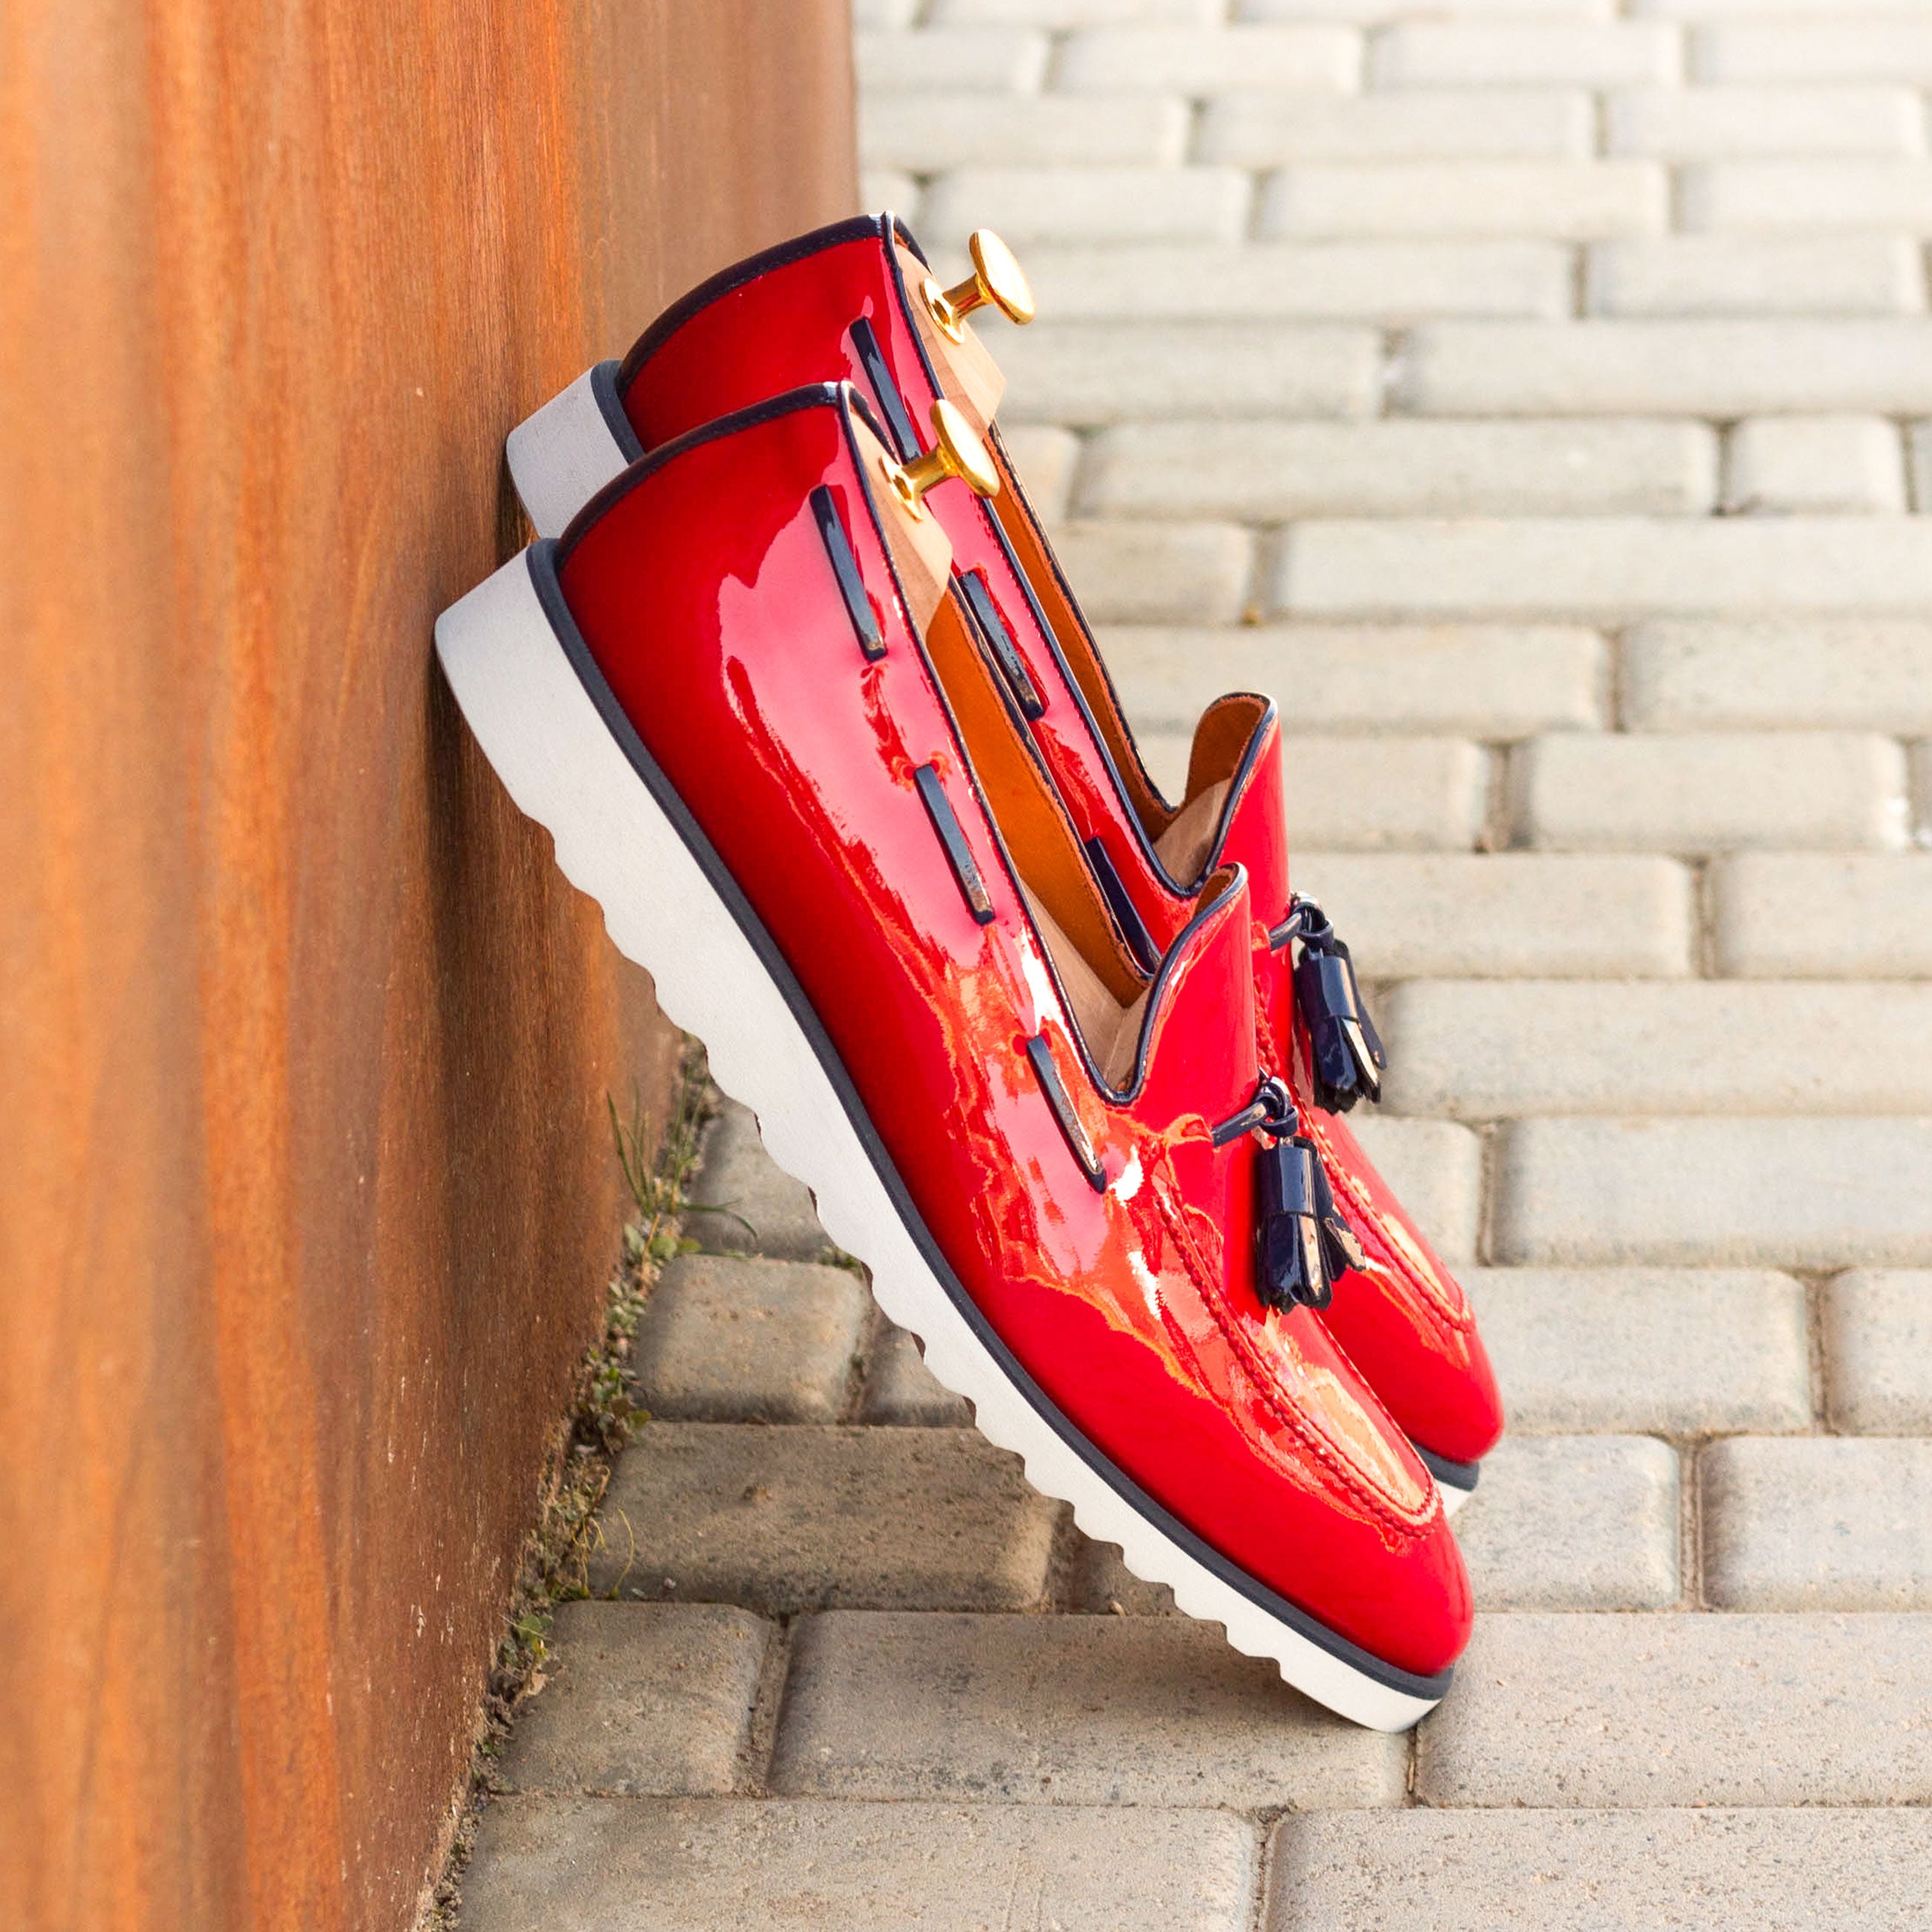 Red Patent Loafer with Sport Wedge Sole